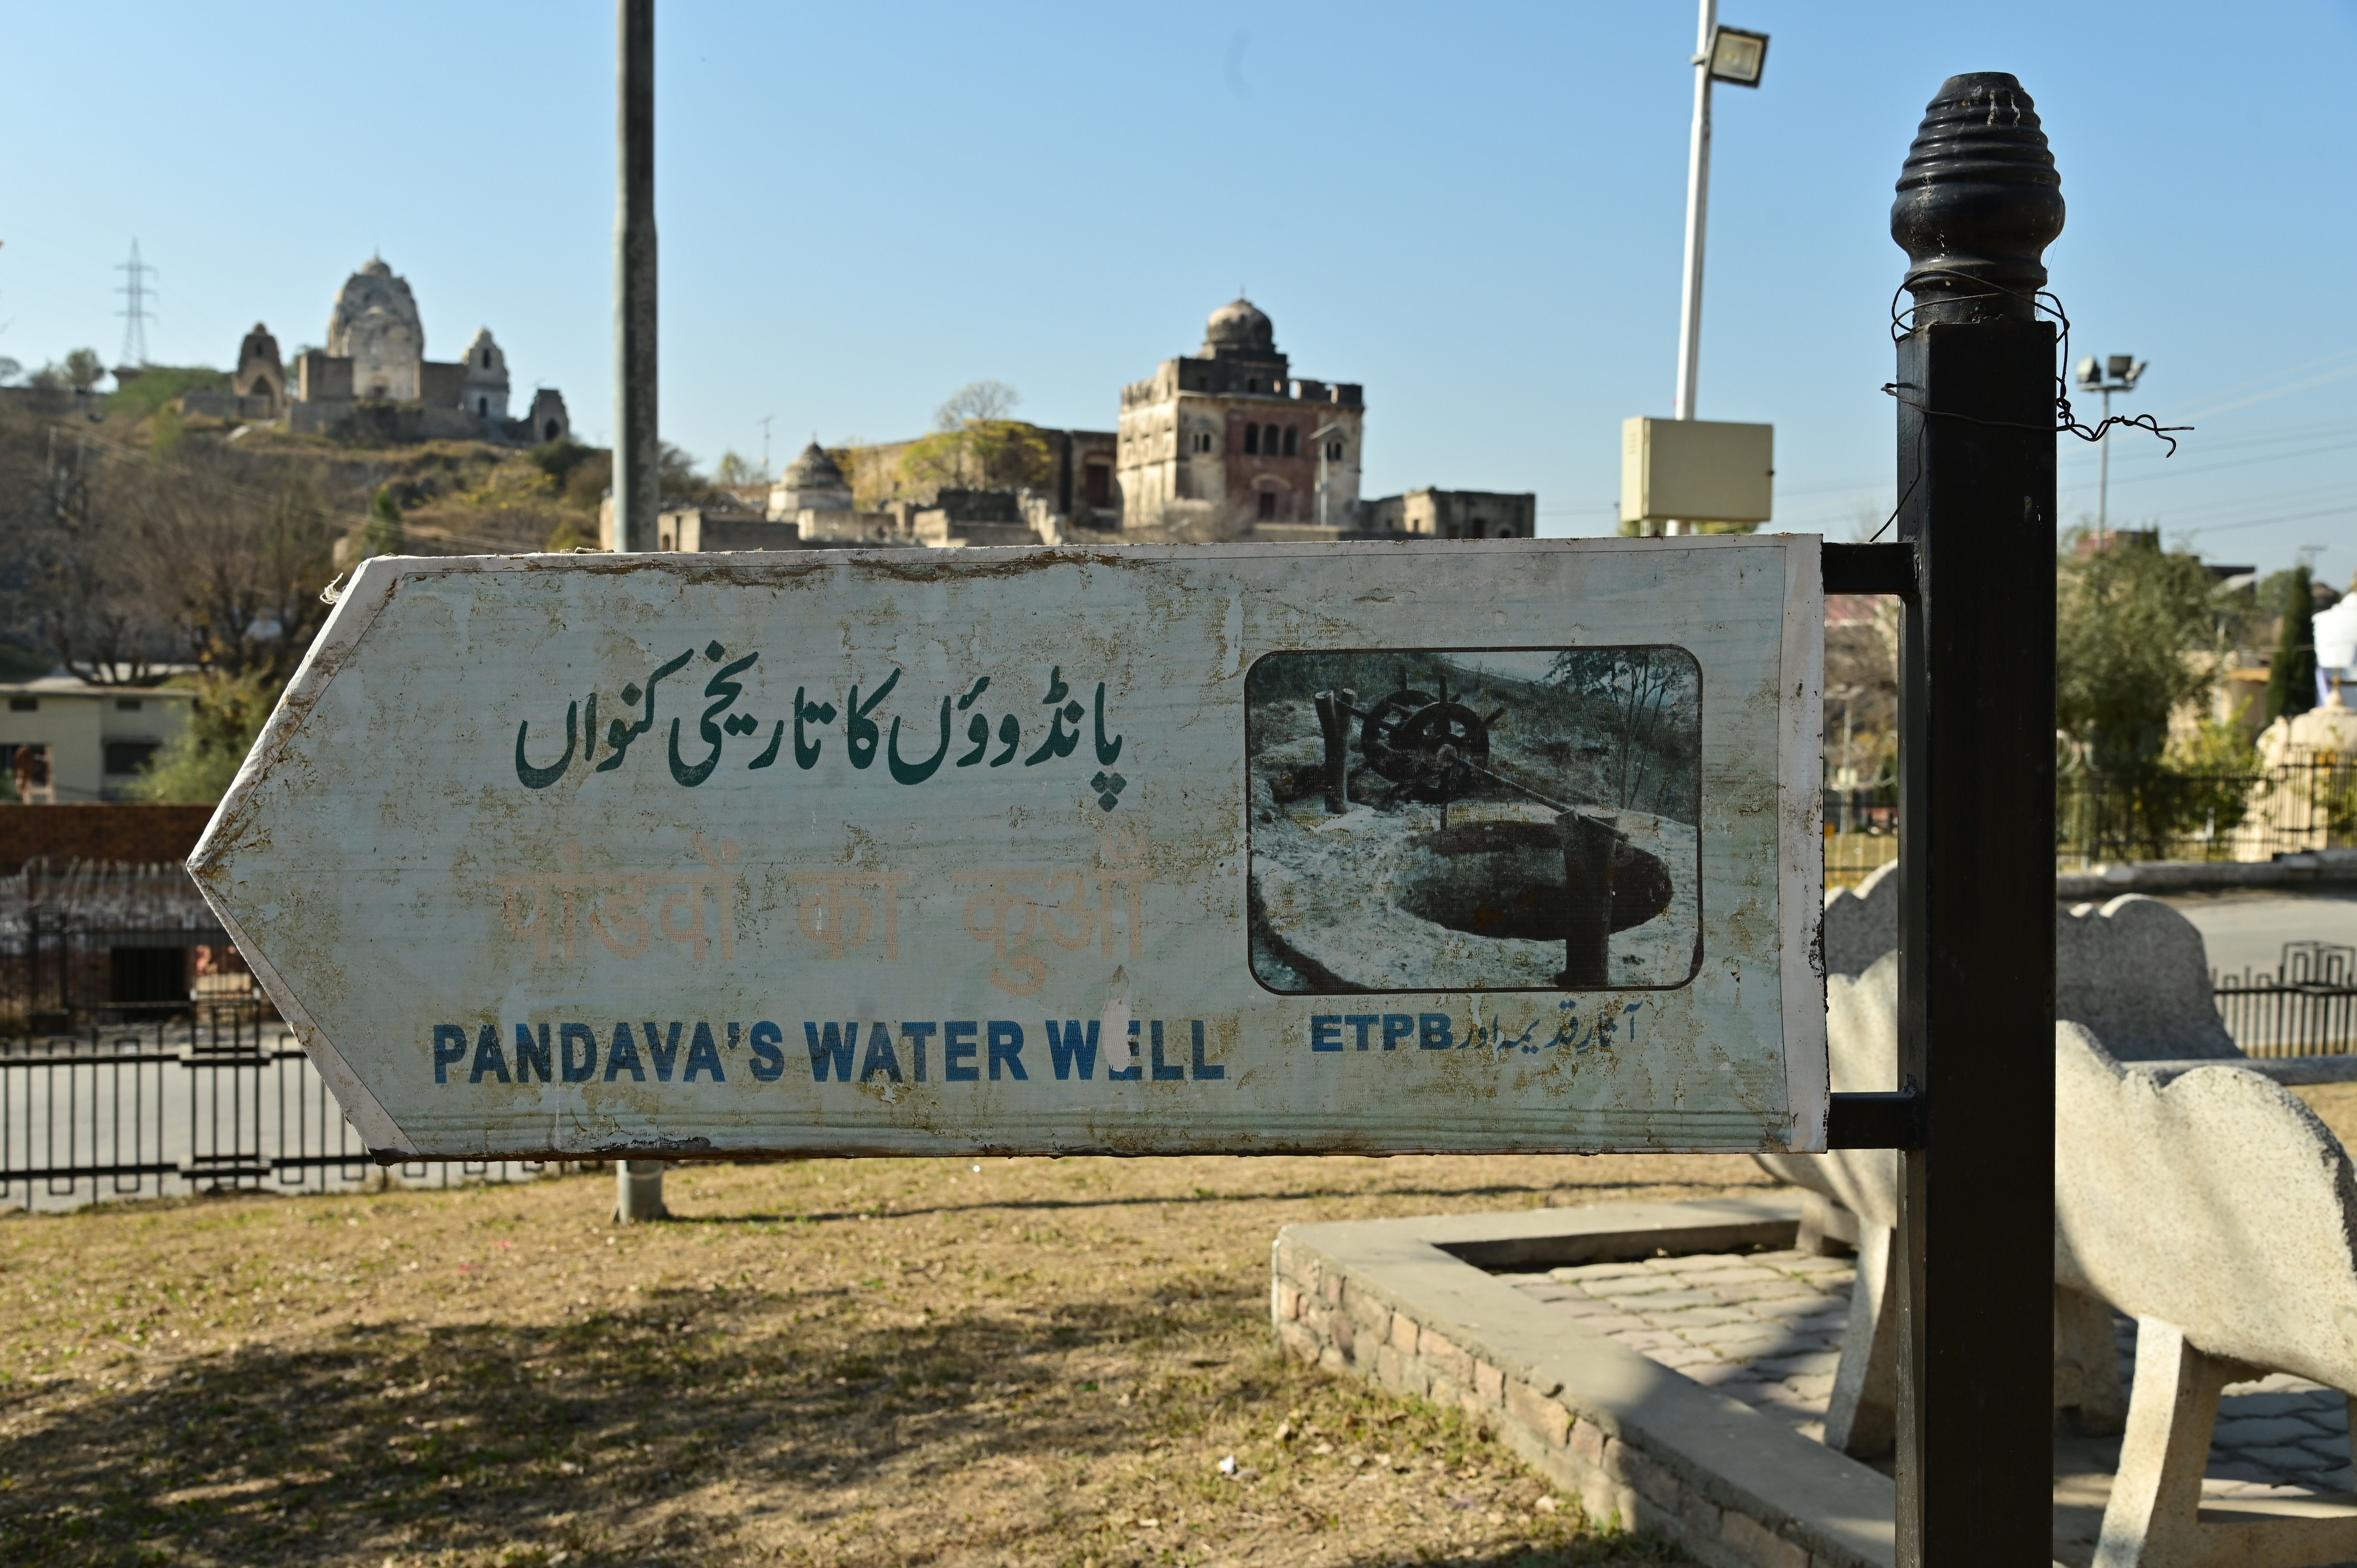 The Direction board indicating the location of Pandava's Water Well